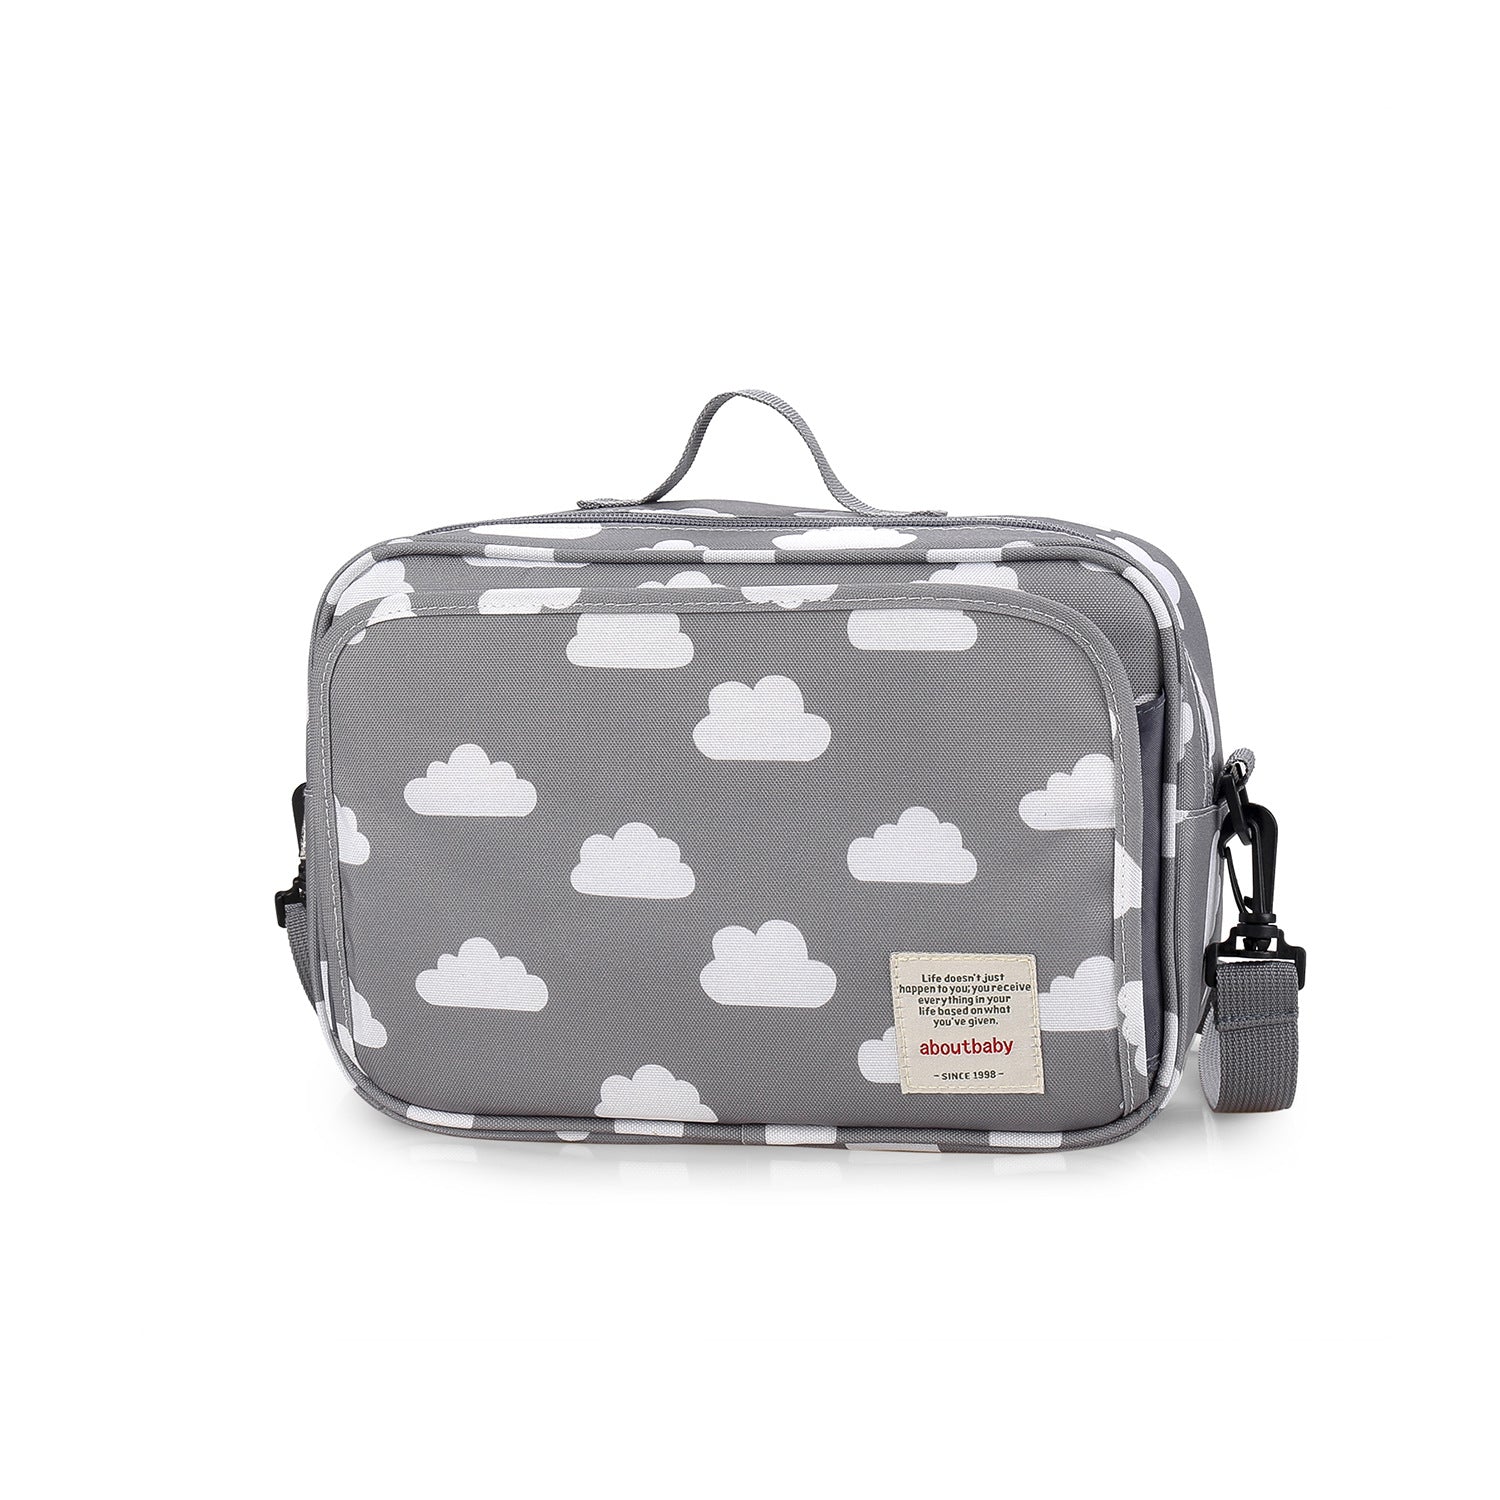 A CJ gray and white bag with clouds on it for diaper storage, packaging diapers, and portable baby outing.